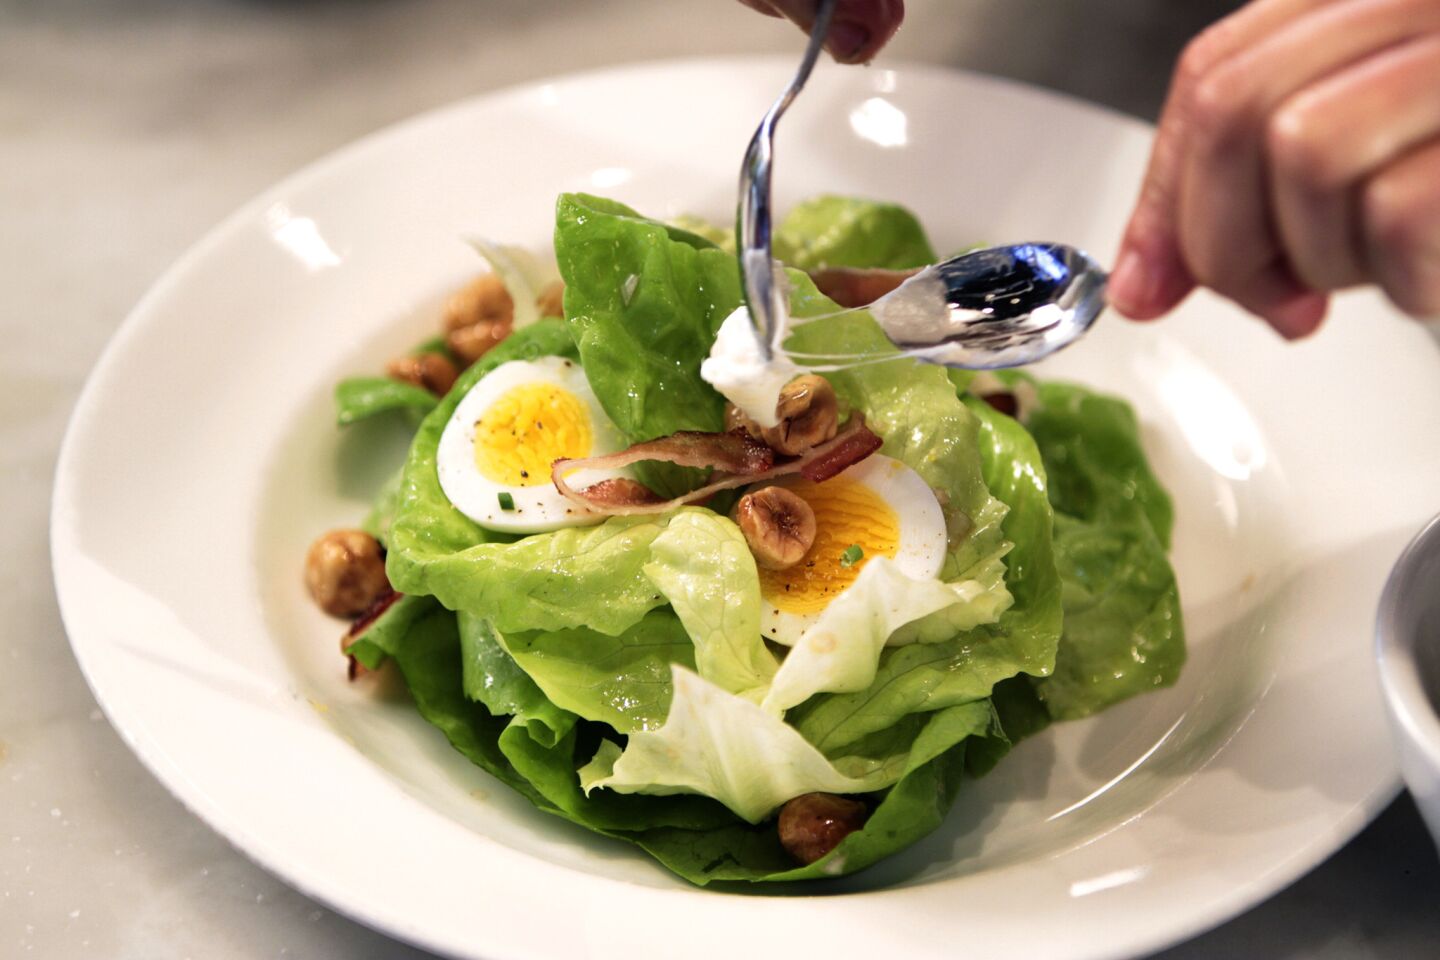 If salad is your thing, look no further than Nancy Silverton for some great dinner ideas. Recipe: Butter lettuce with nuts, bacon, egg and cheese